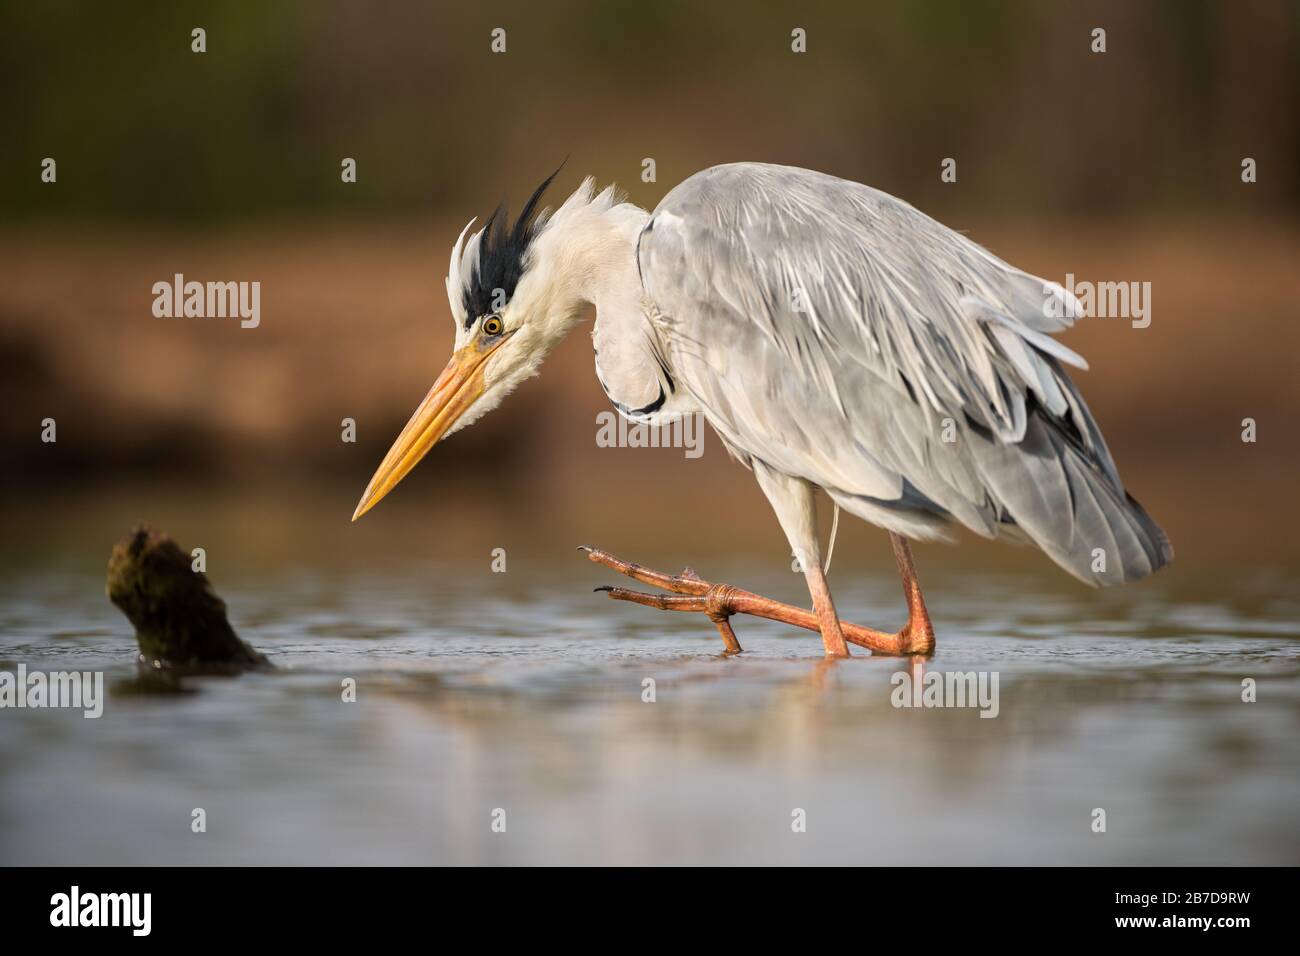 A close up portrait of a Grey heron standing in the water with one leg raised, taken in the Madikwe game Reserve, South Africa. Stock Photo